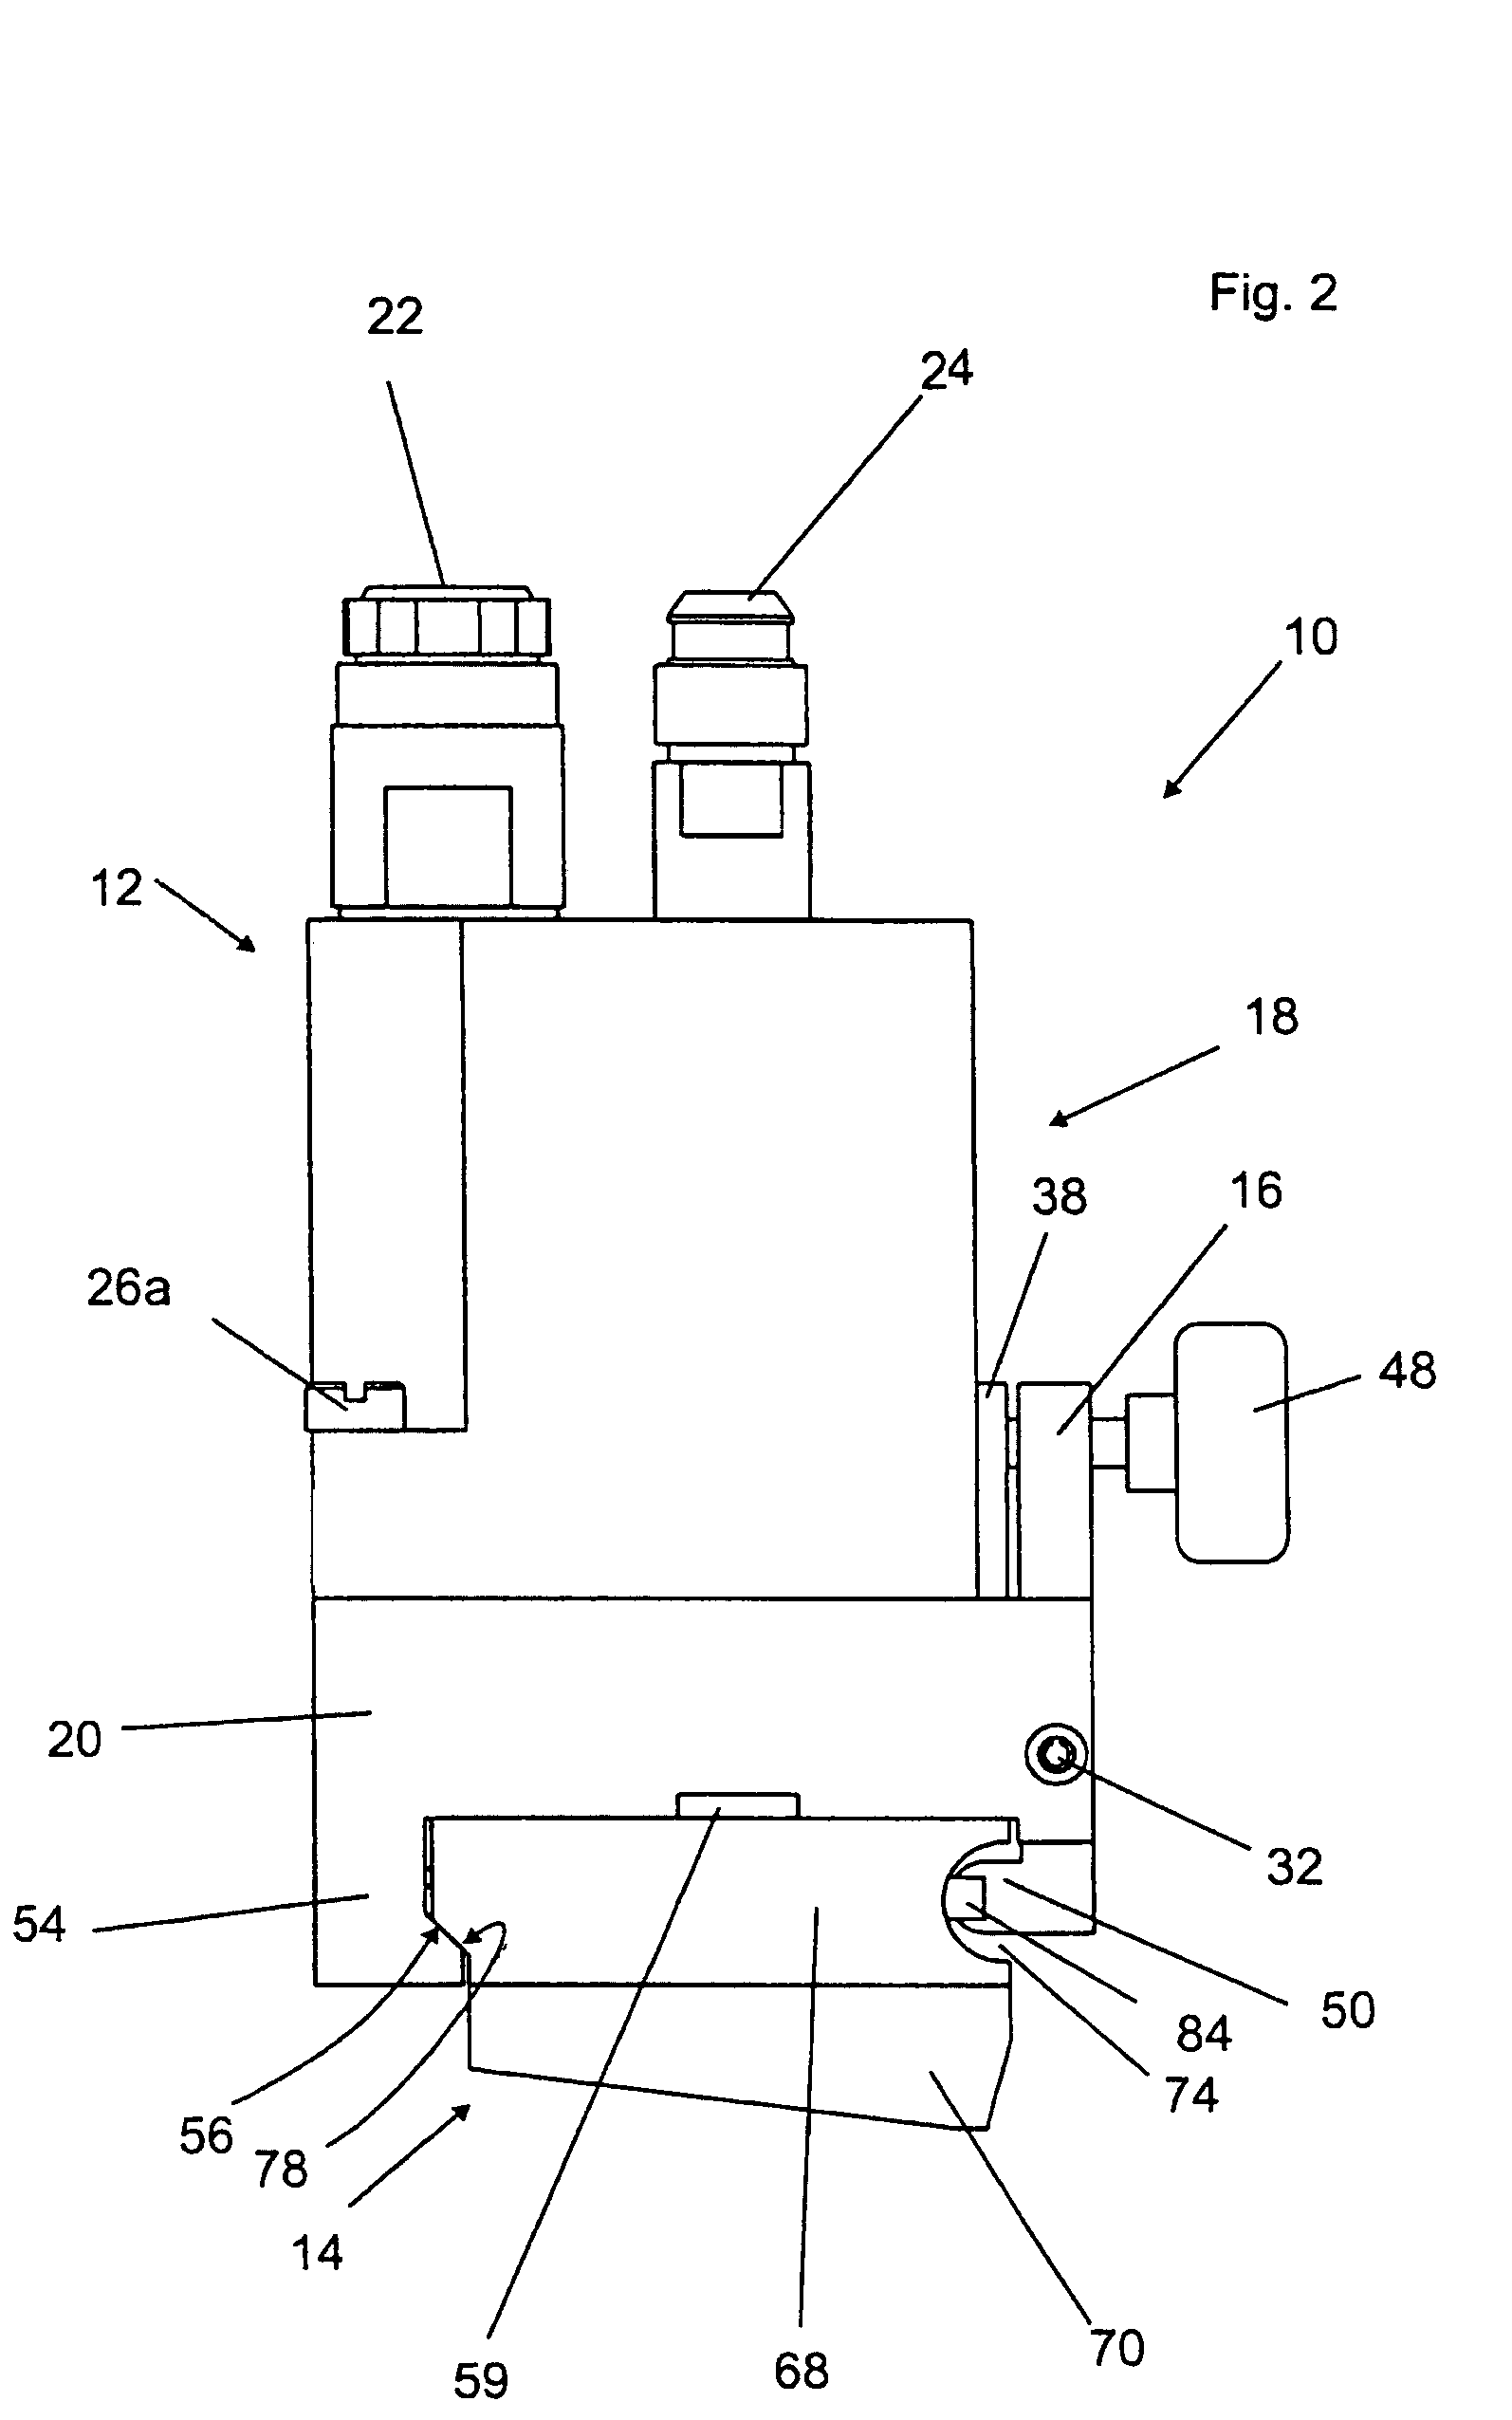 Apparatus for applying fluid to a substrate